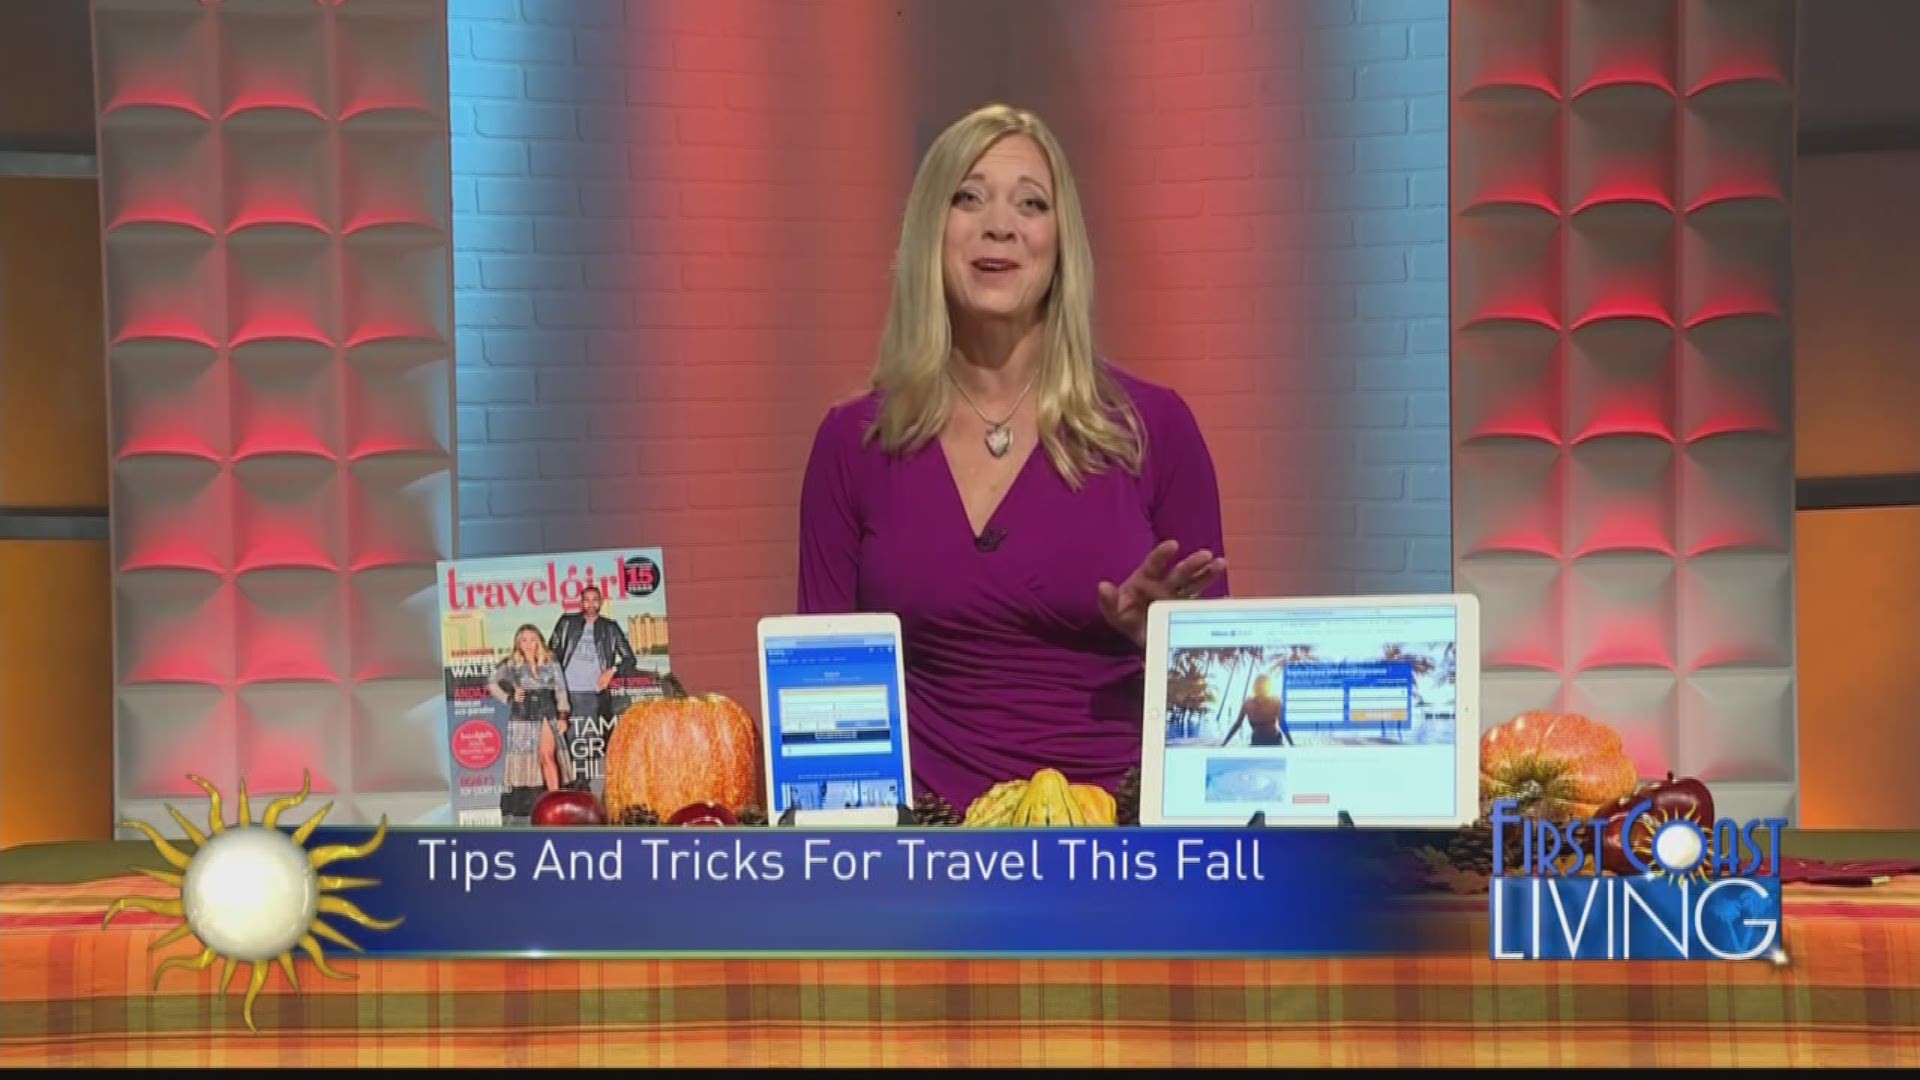 Tips and Tricks For Travel This Fall